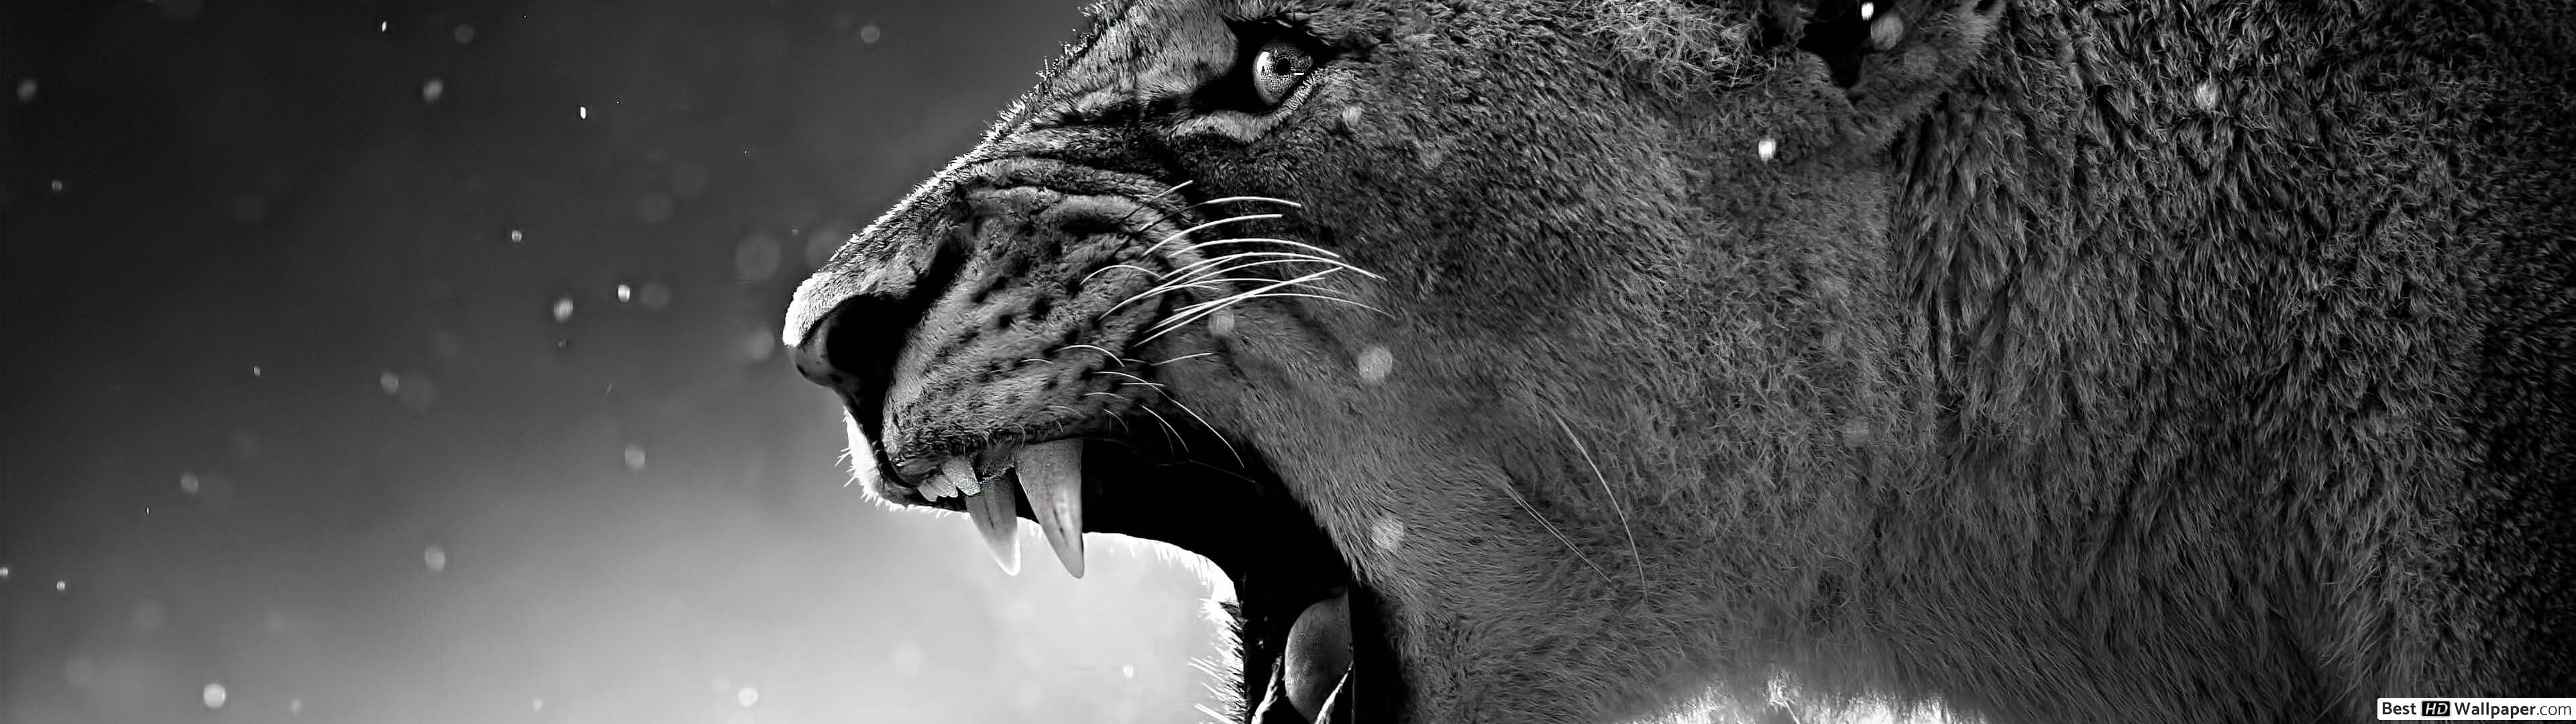 Angry lion HD wallpaper download